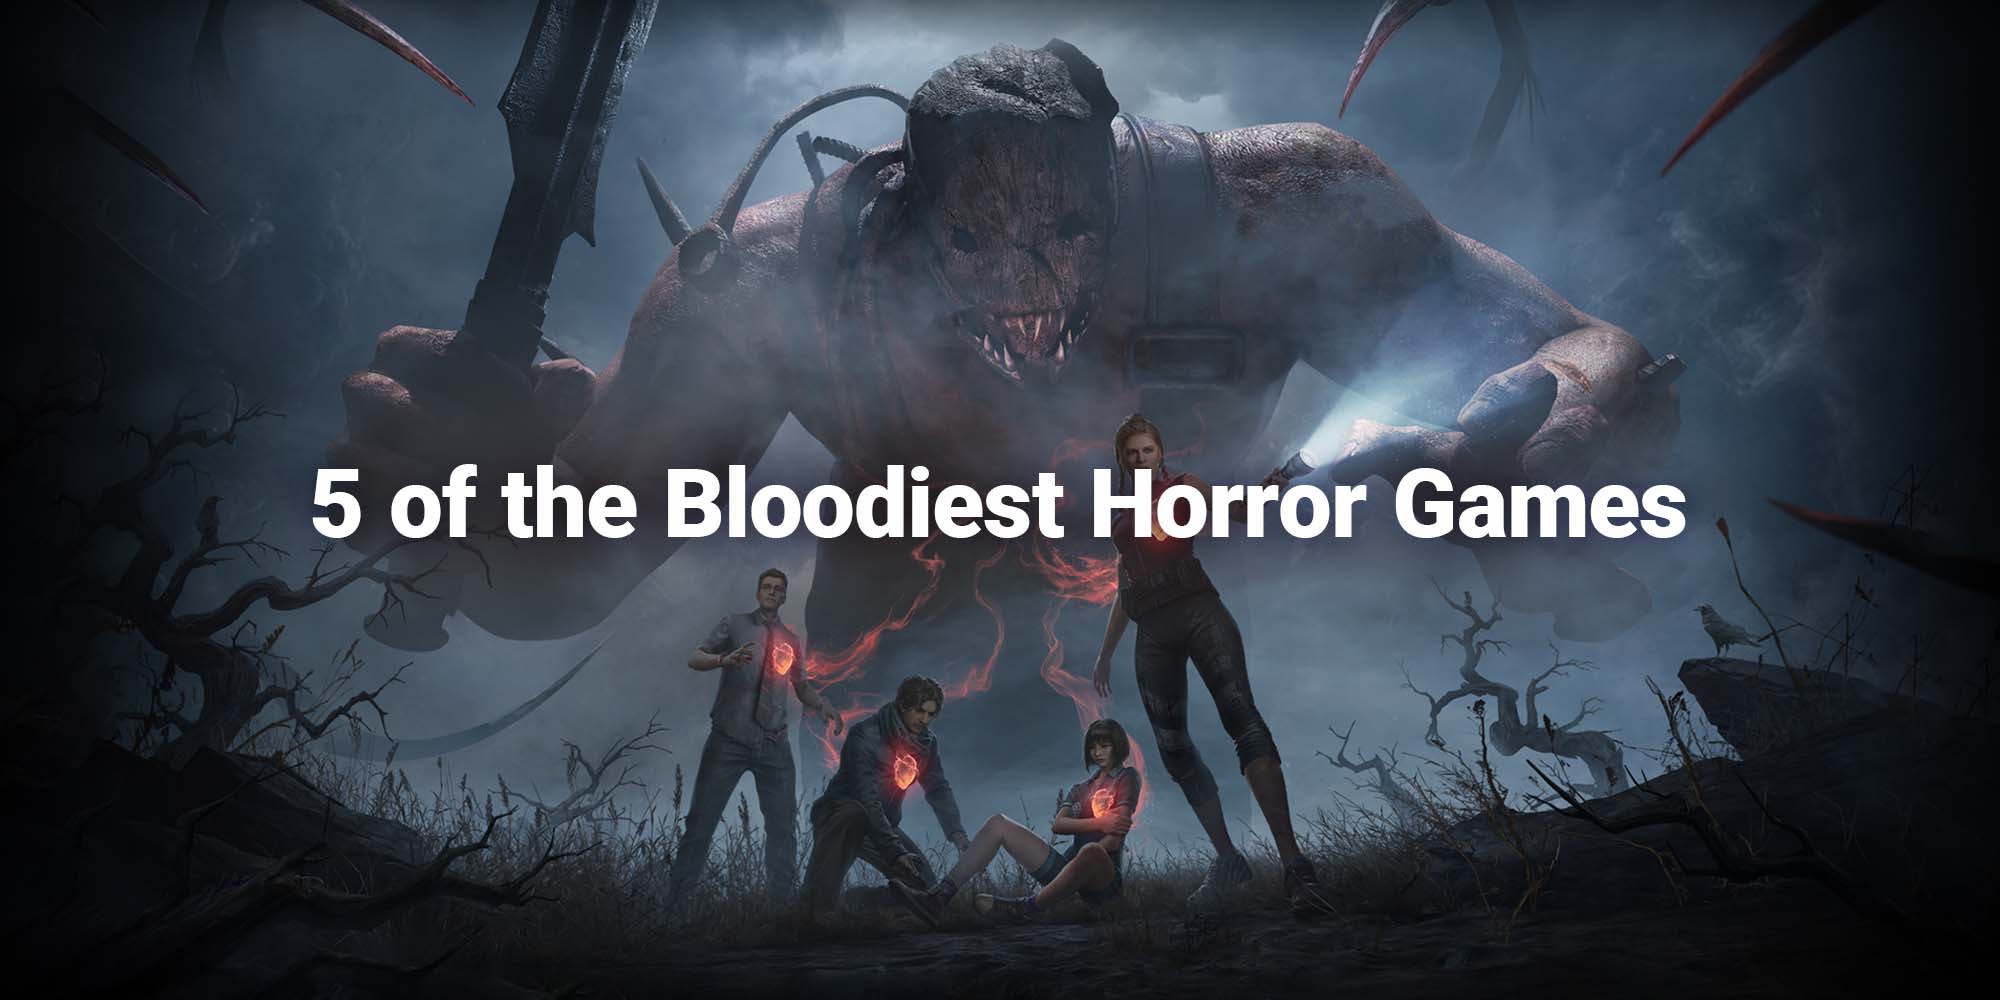 5 of the Bloodiest Horror Games 🩸 - Dead by Daylight Mobile - The Walking  Dead: A New Fronti - Friday the 13th: Killer Puzzle - TapTap